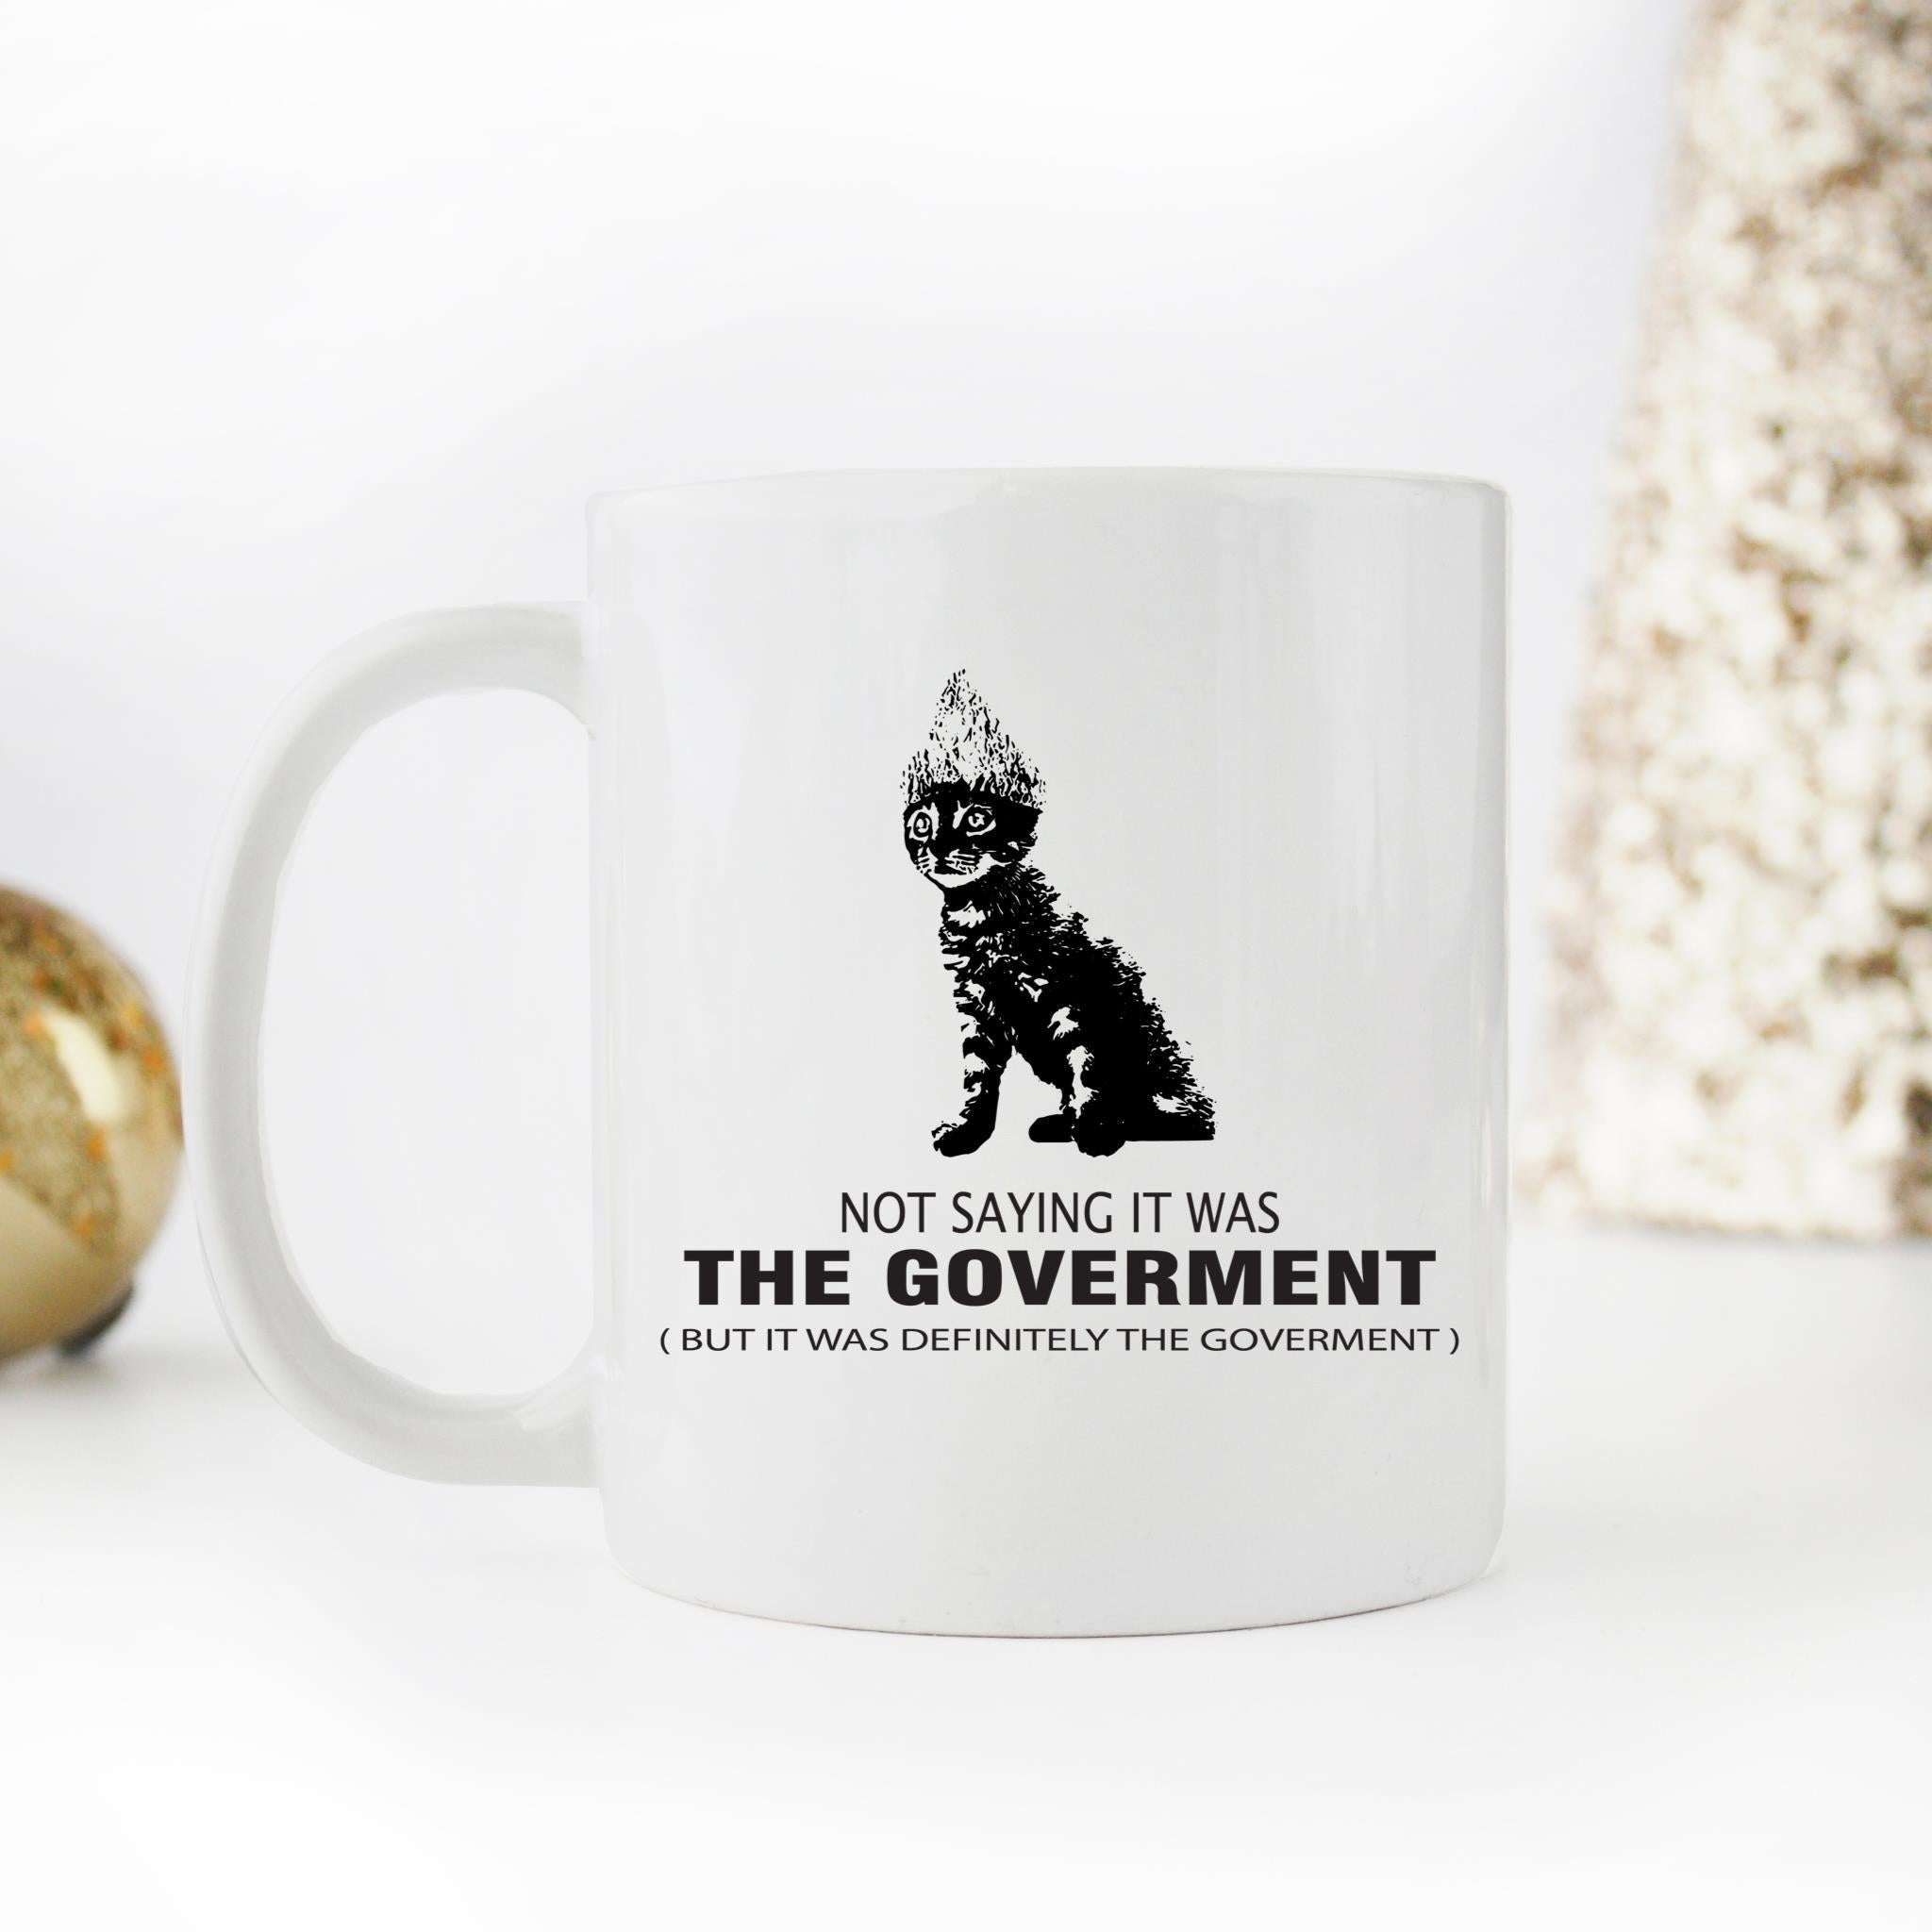 Skitongifts Funny Ceramic Novelty Coffee Mug Funny Halloween Cat Tin Foil Hat Conspiracy, Not Saying It Was The Government 1digTe6